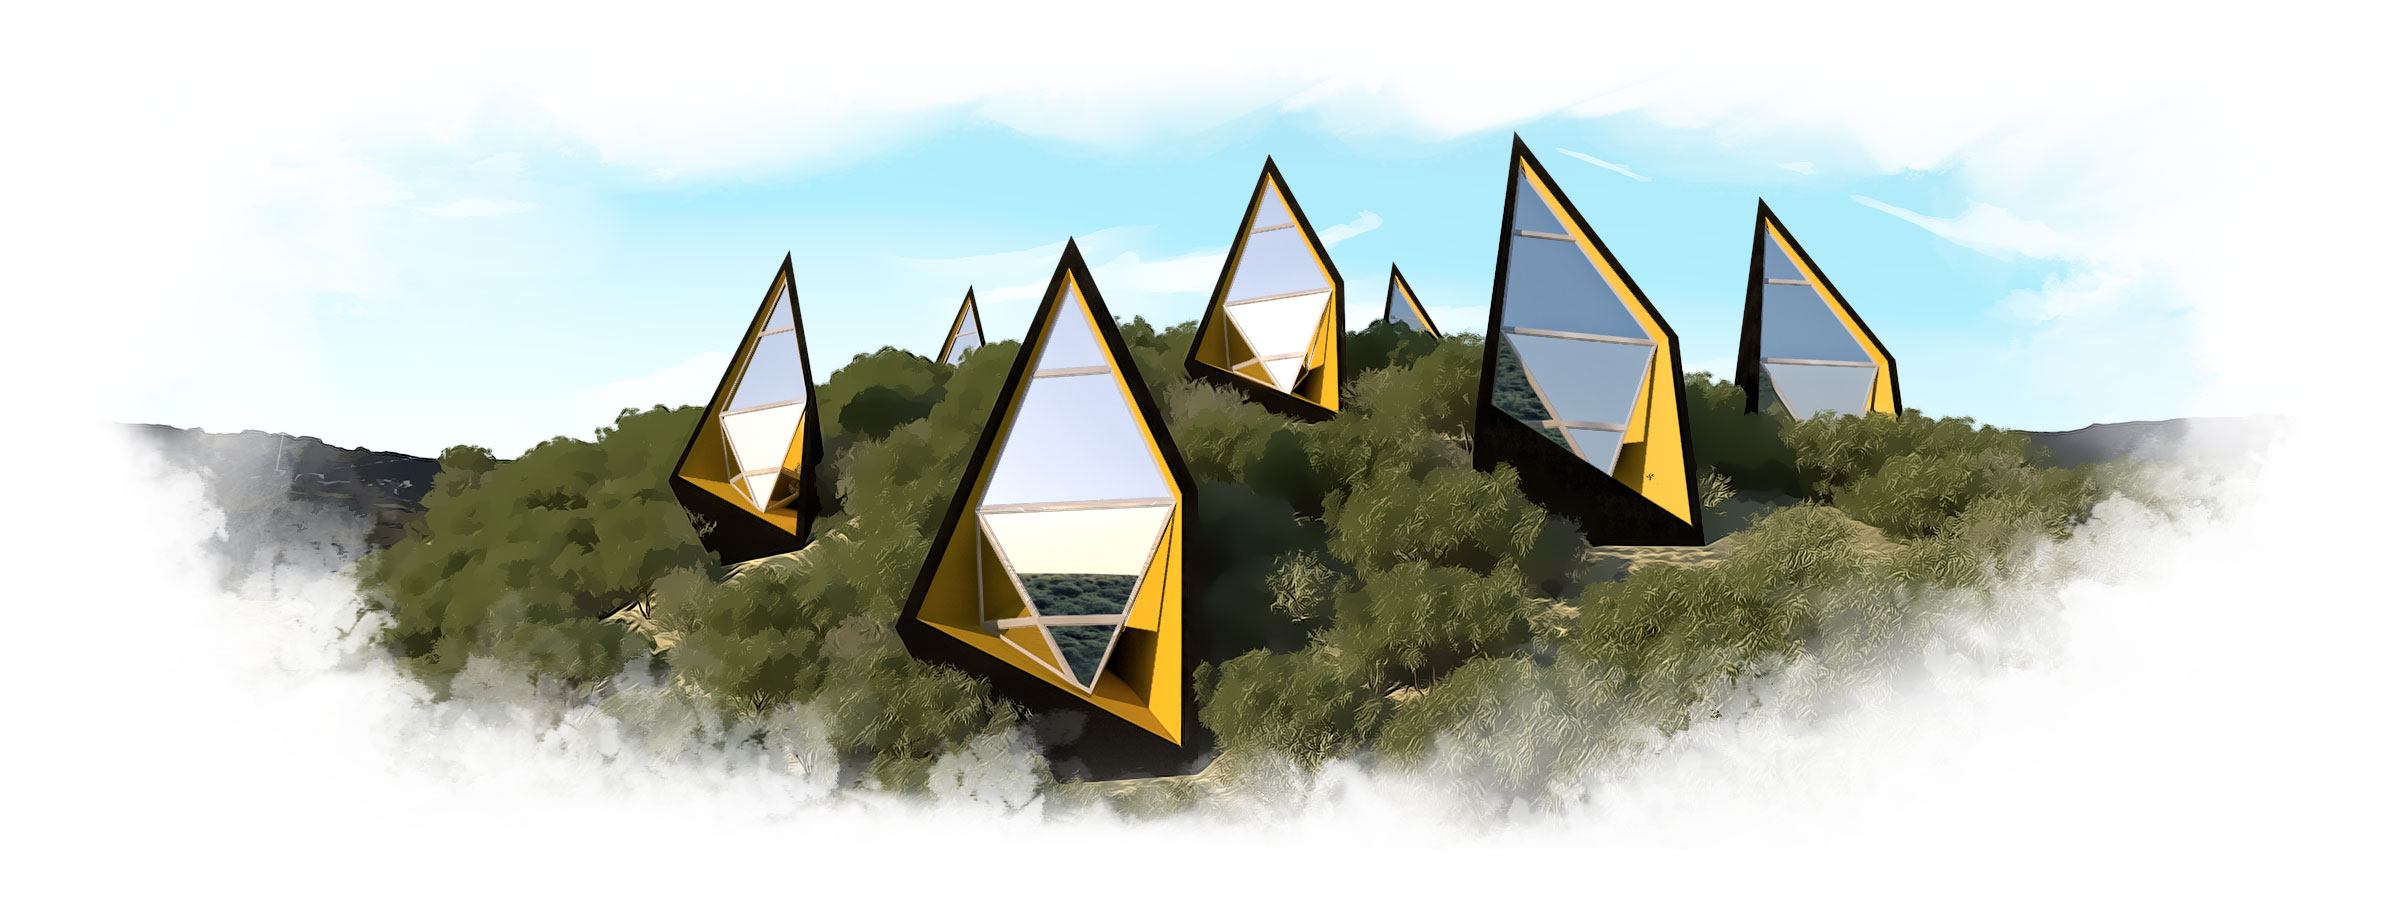 View of 'Rutile' self-sufficient sustainable housing cell by Inkrypted - Gaby el Ashkar